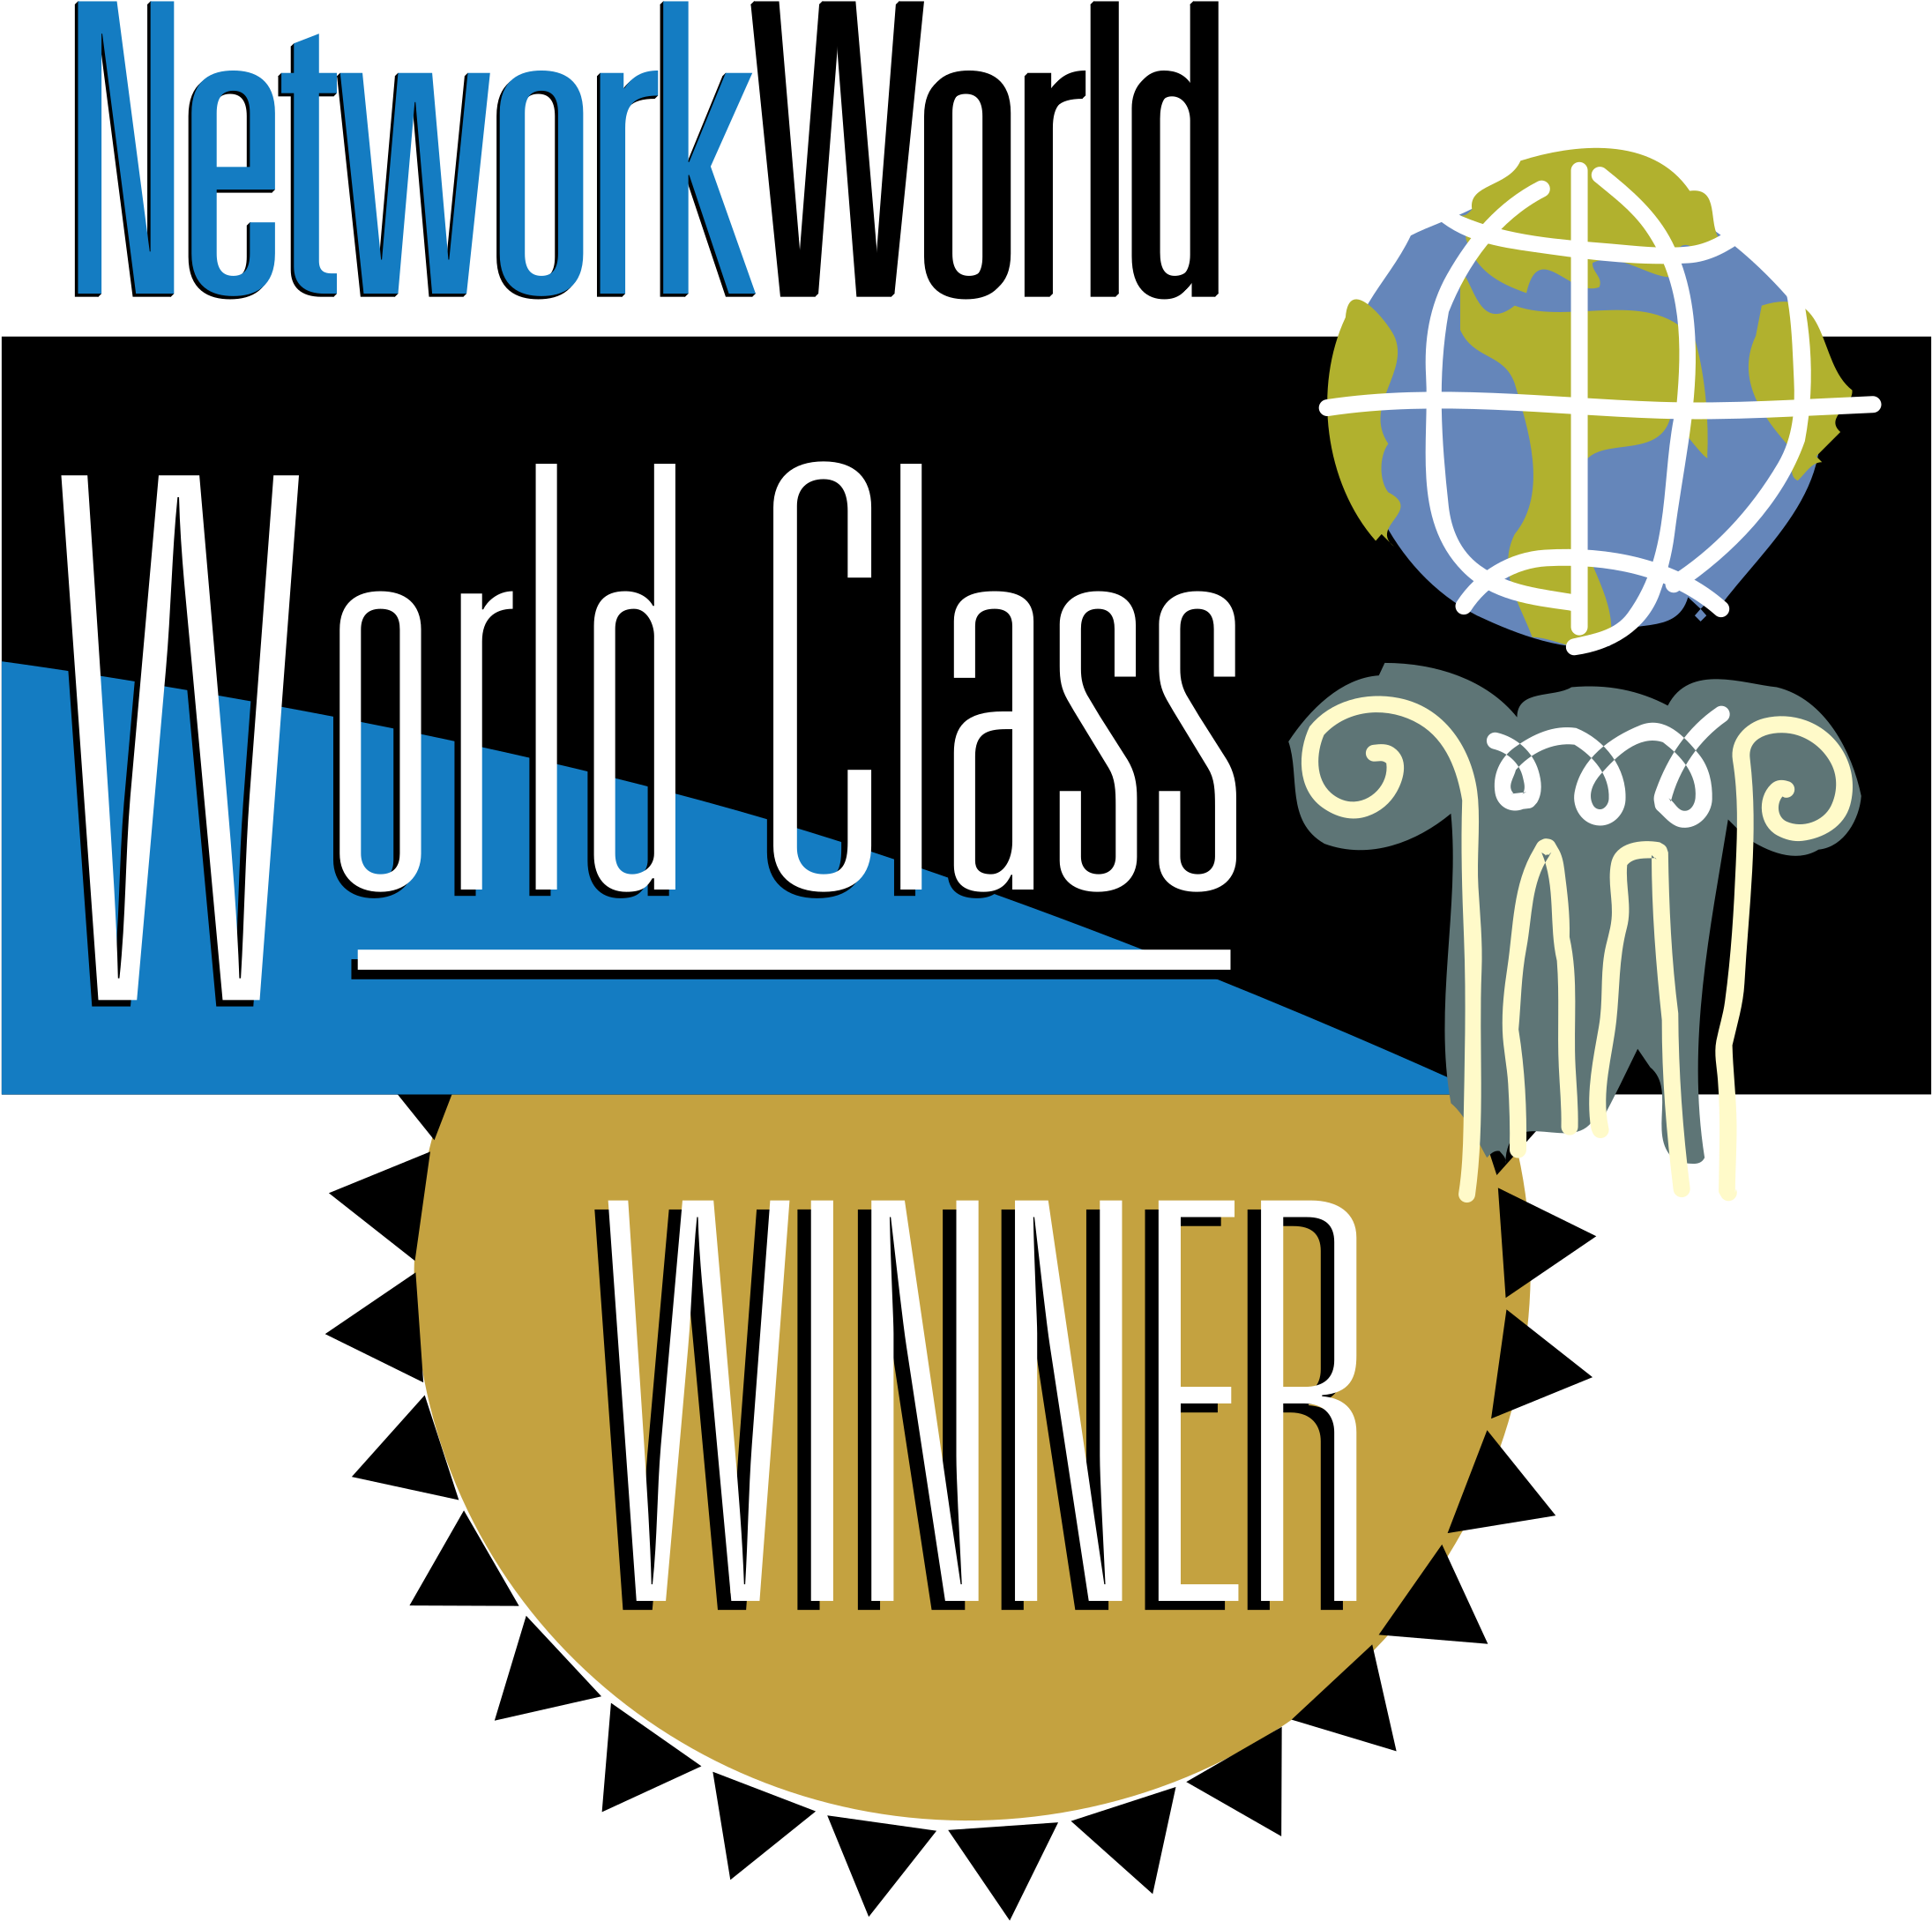 Download Networkworld World Class Winner Logo Png Transparent Logo Agricoltura Biologica Vettoriale Png Image With No Background Pngkey Com